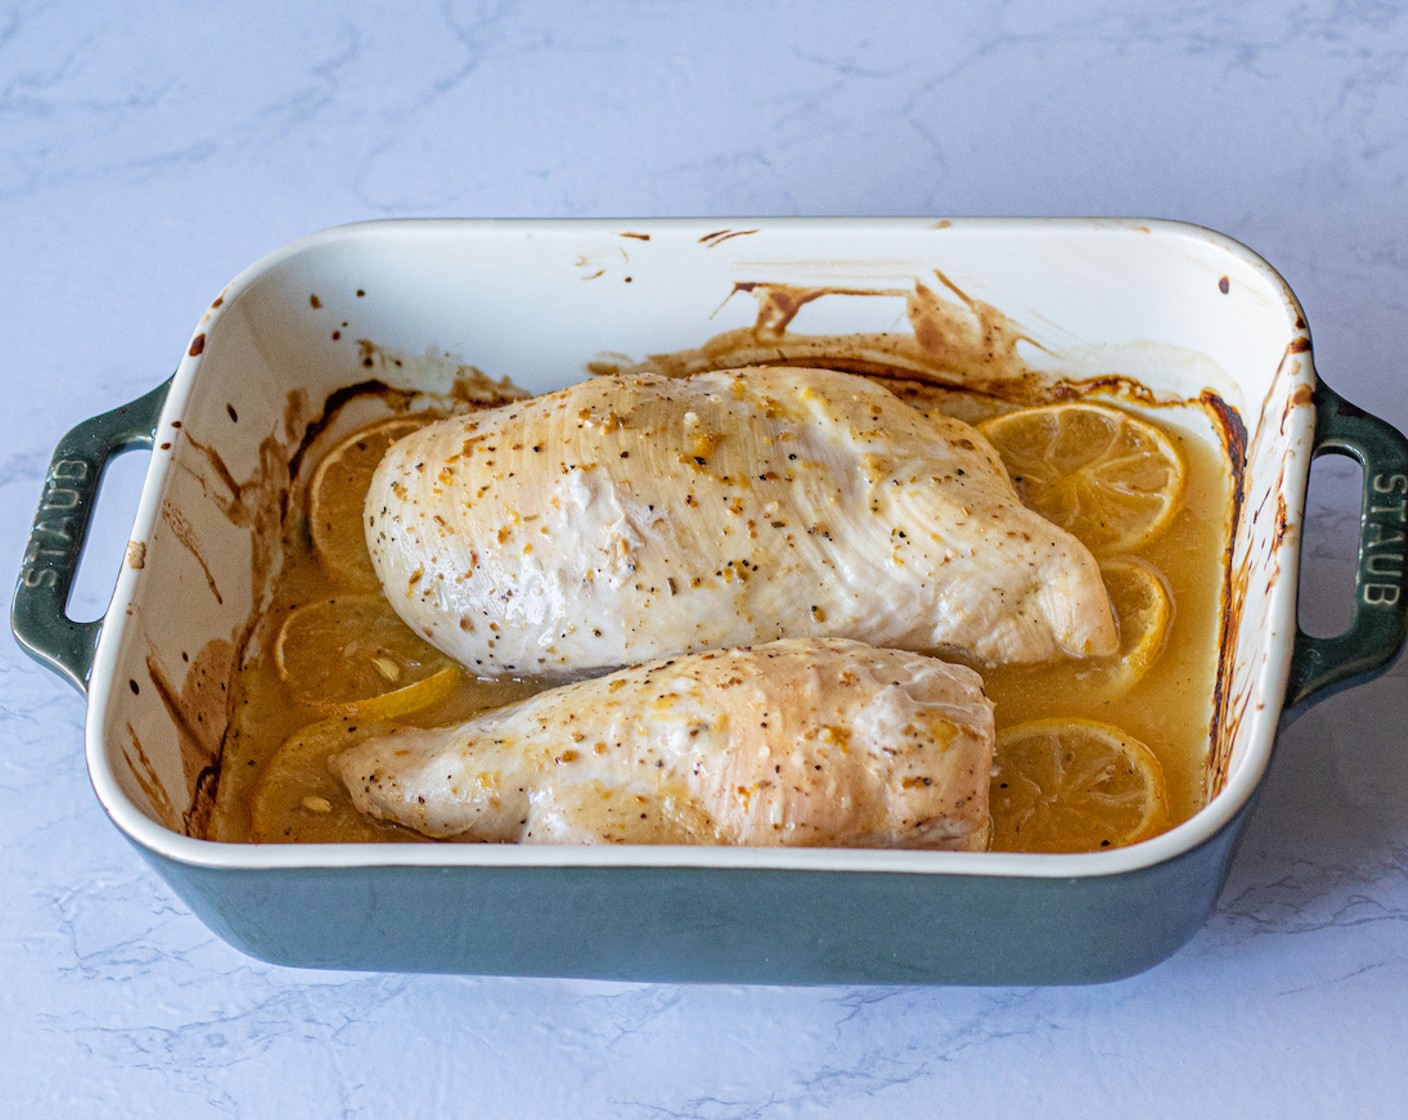 step 4 Bake for 45 minutes or until the chicken reaches an internal temperature of 165 degrees F (74 degrees C). Remember, oven temperatures may vary.